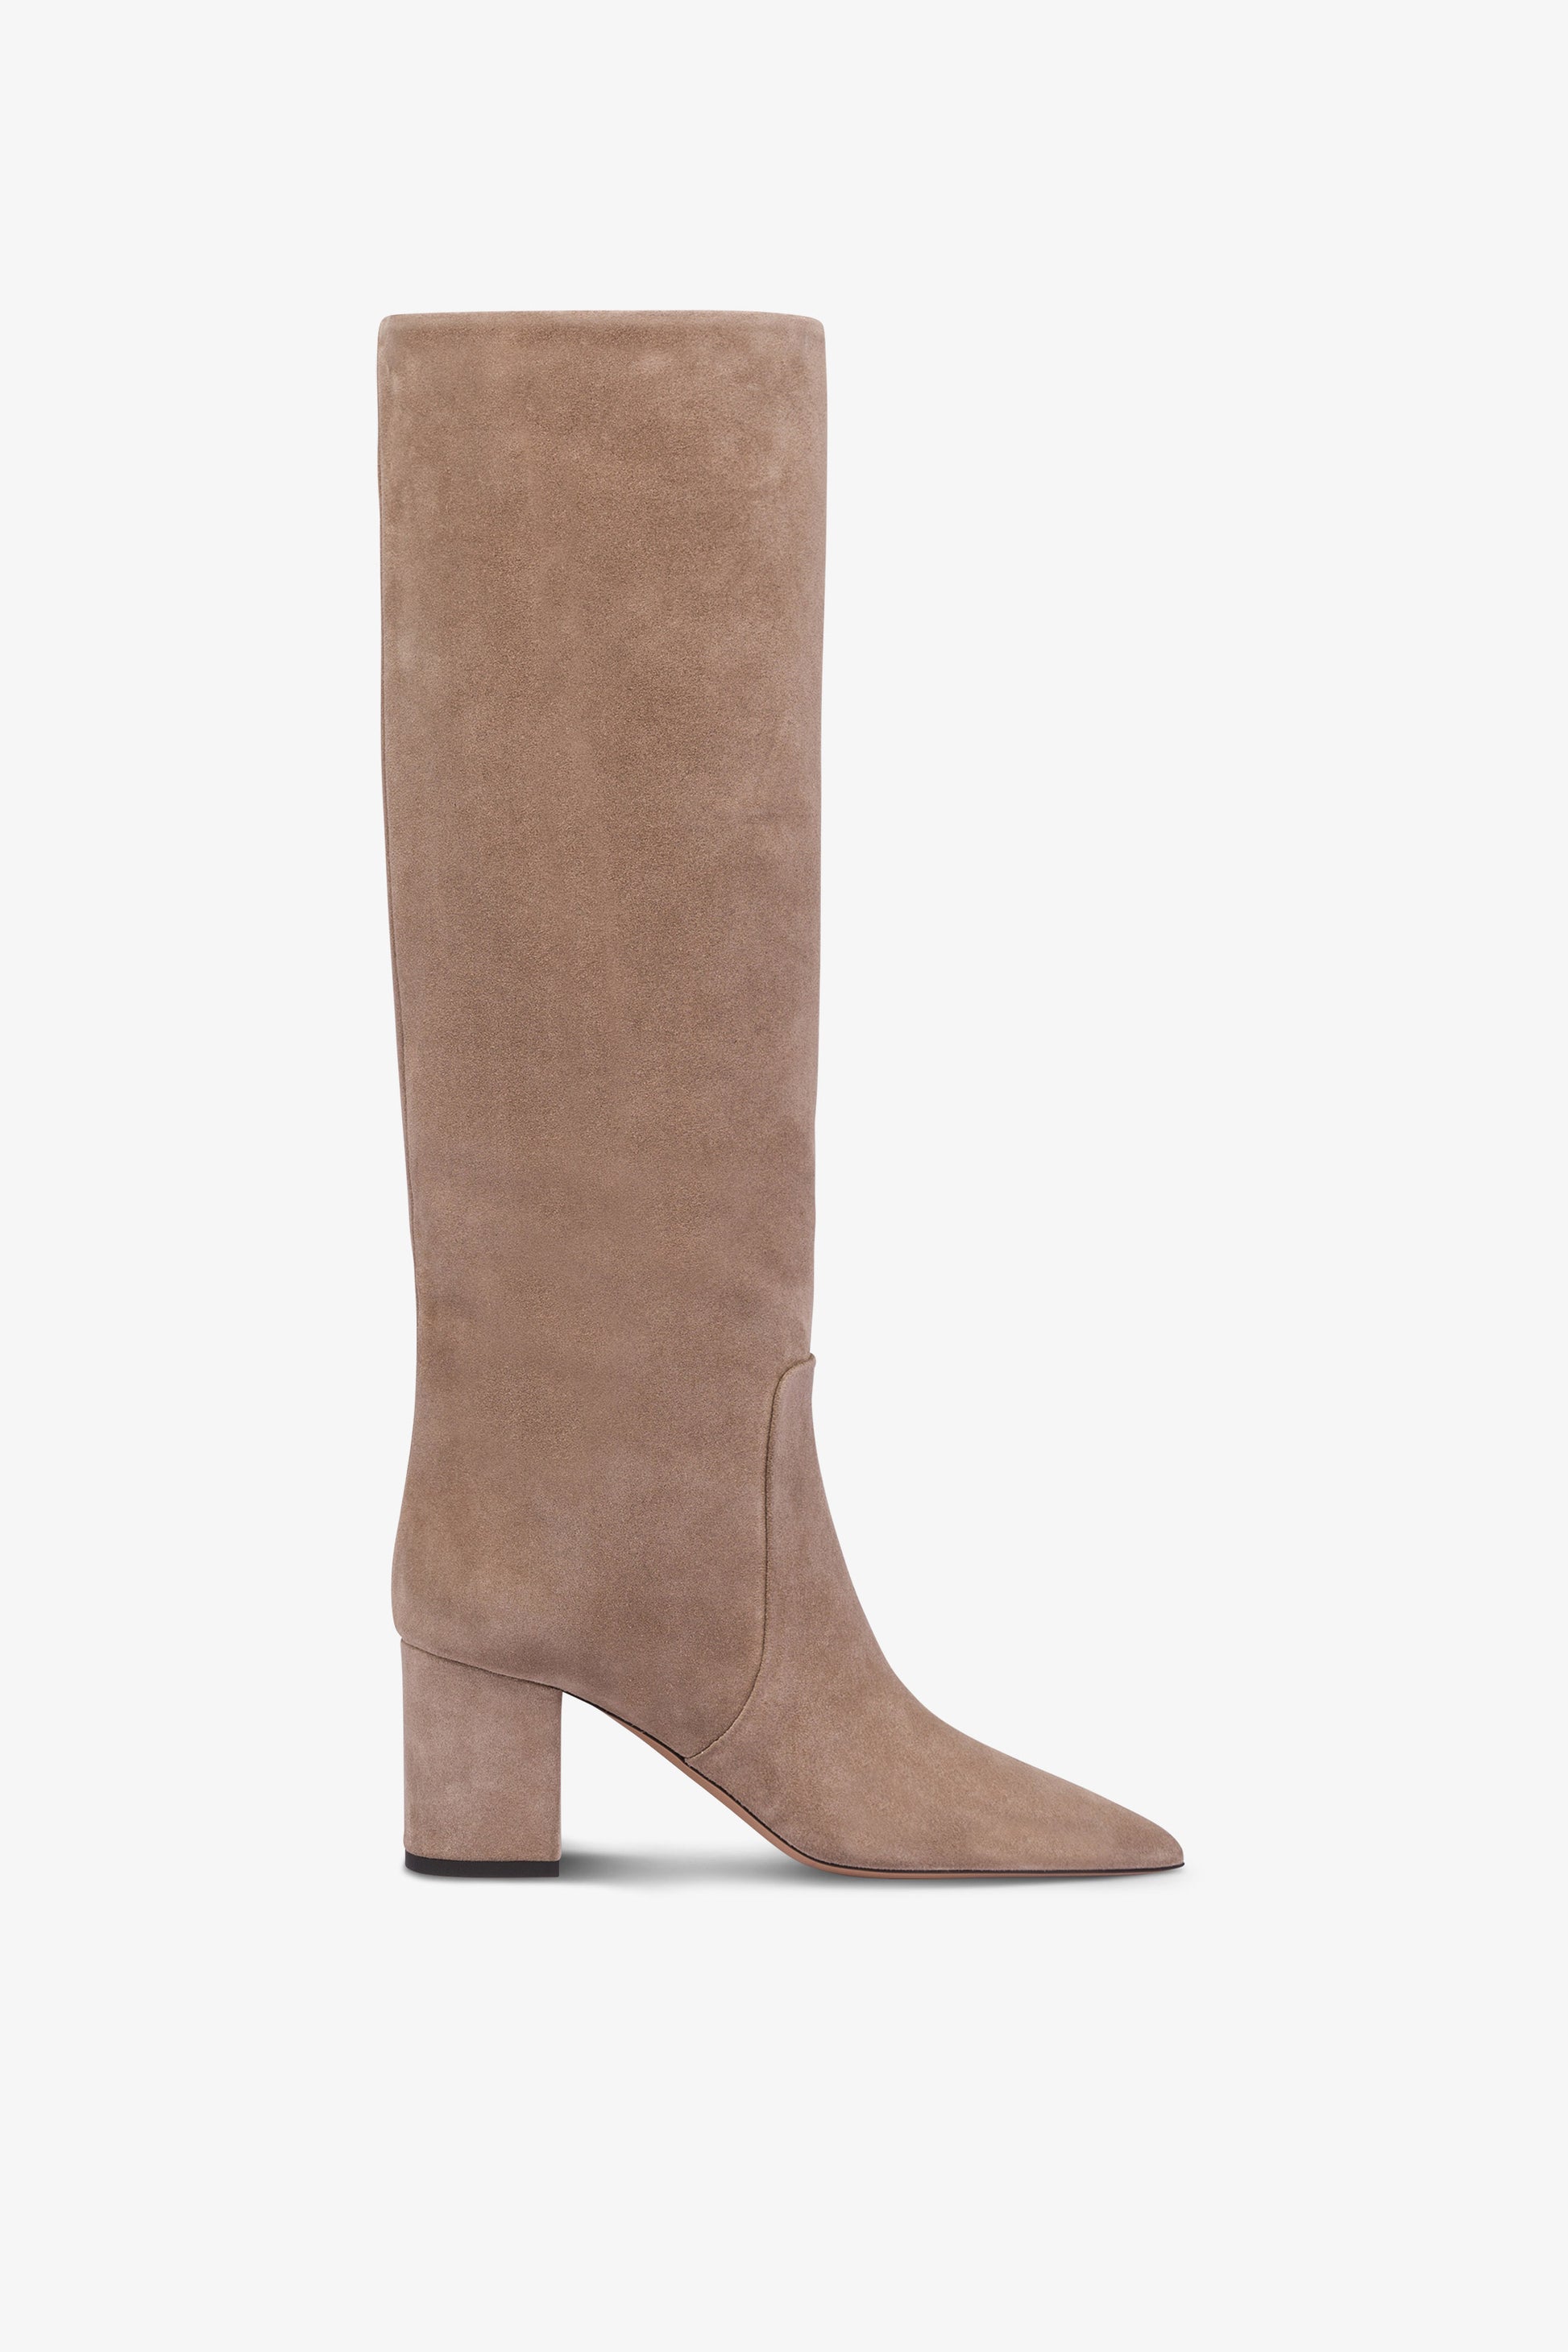 Knee-high boots in soft koala suede leather